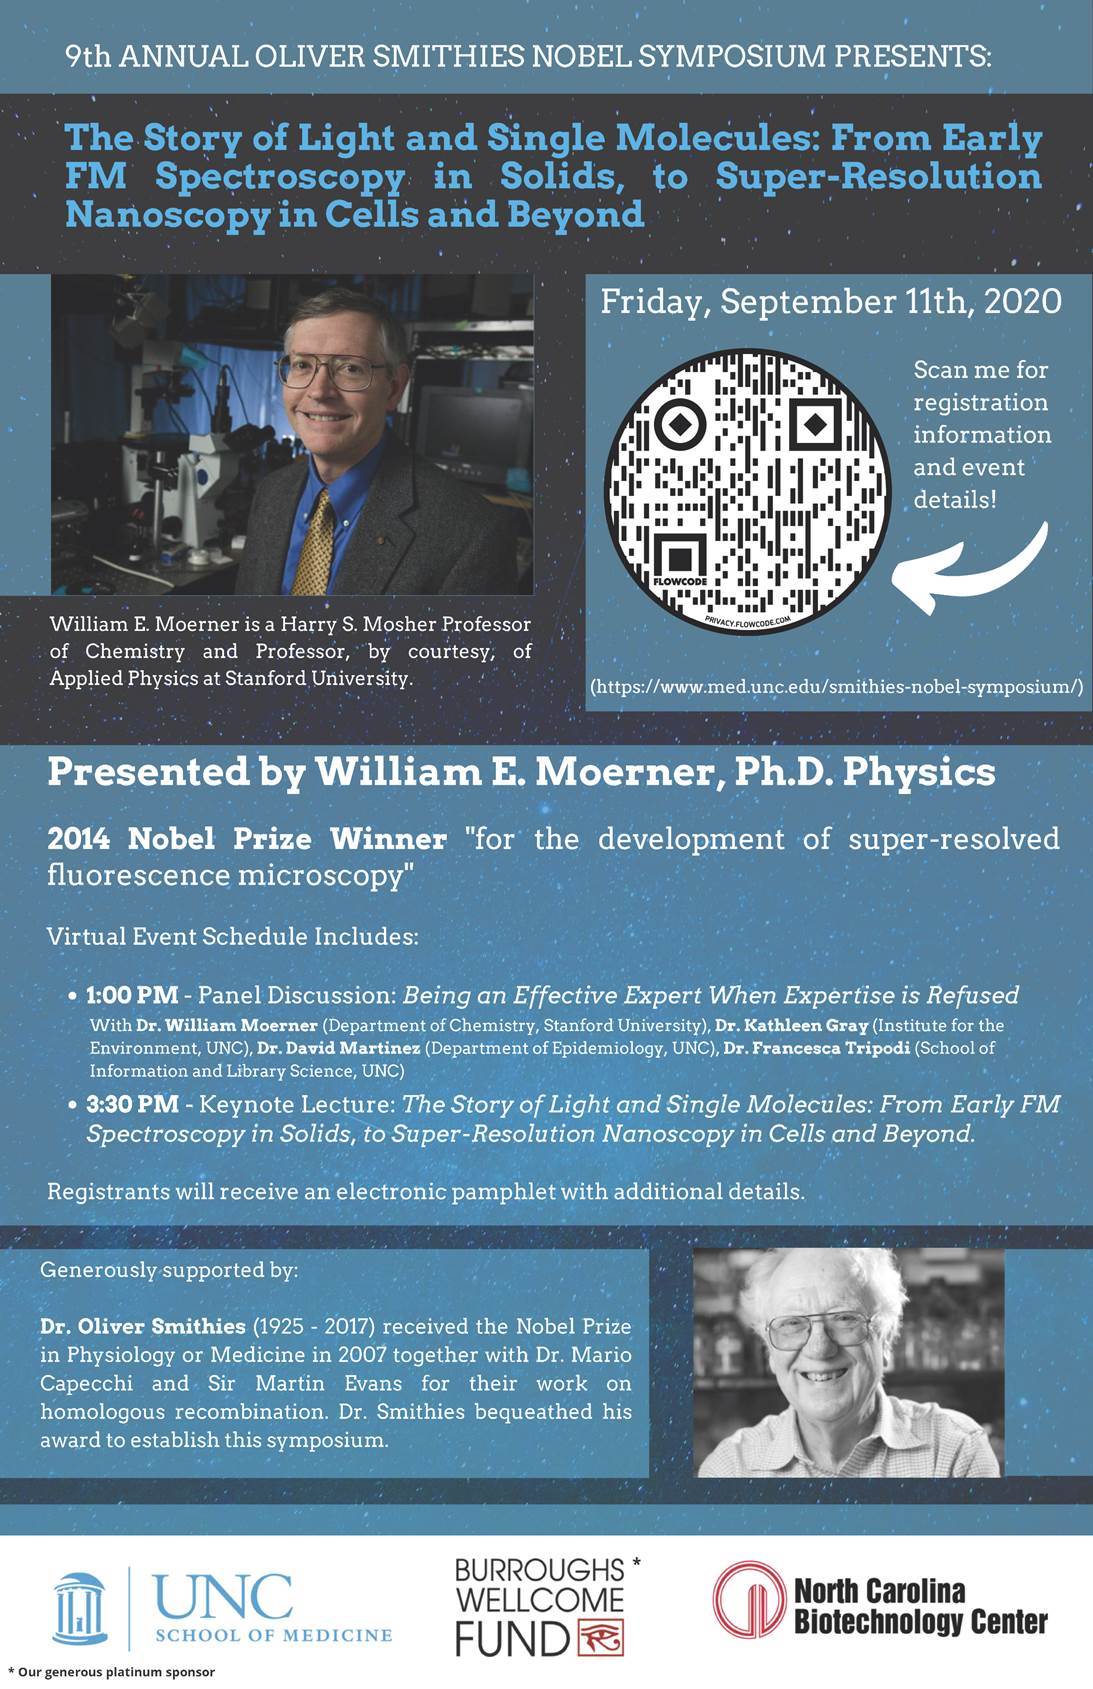 poster for 9th Annual Oliver Smithies Nobel Laureate Symposium